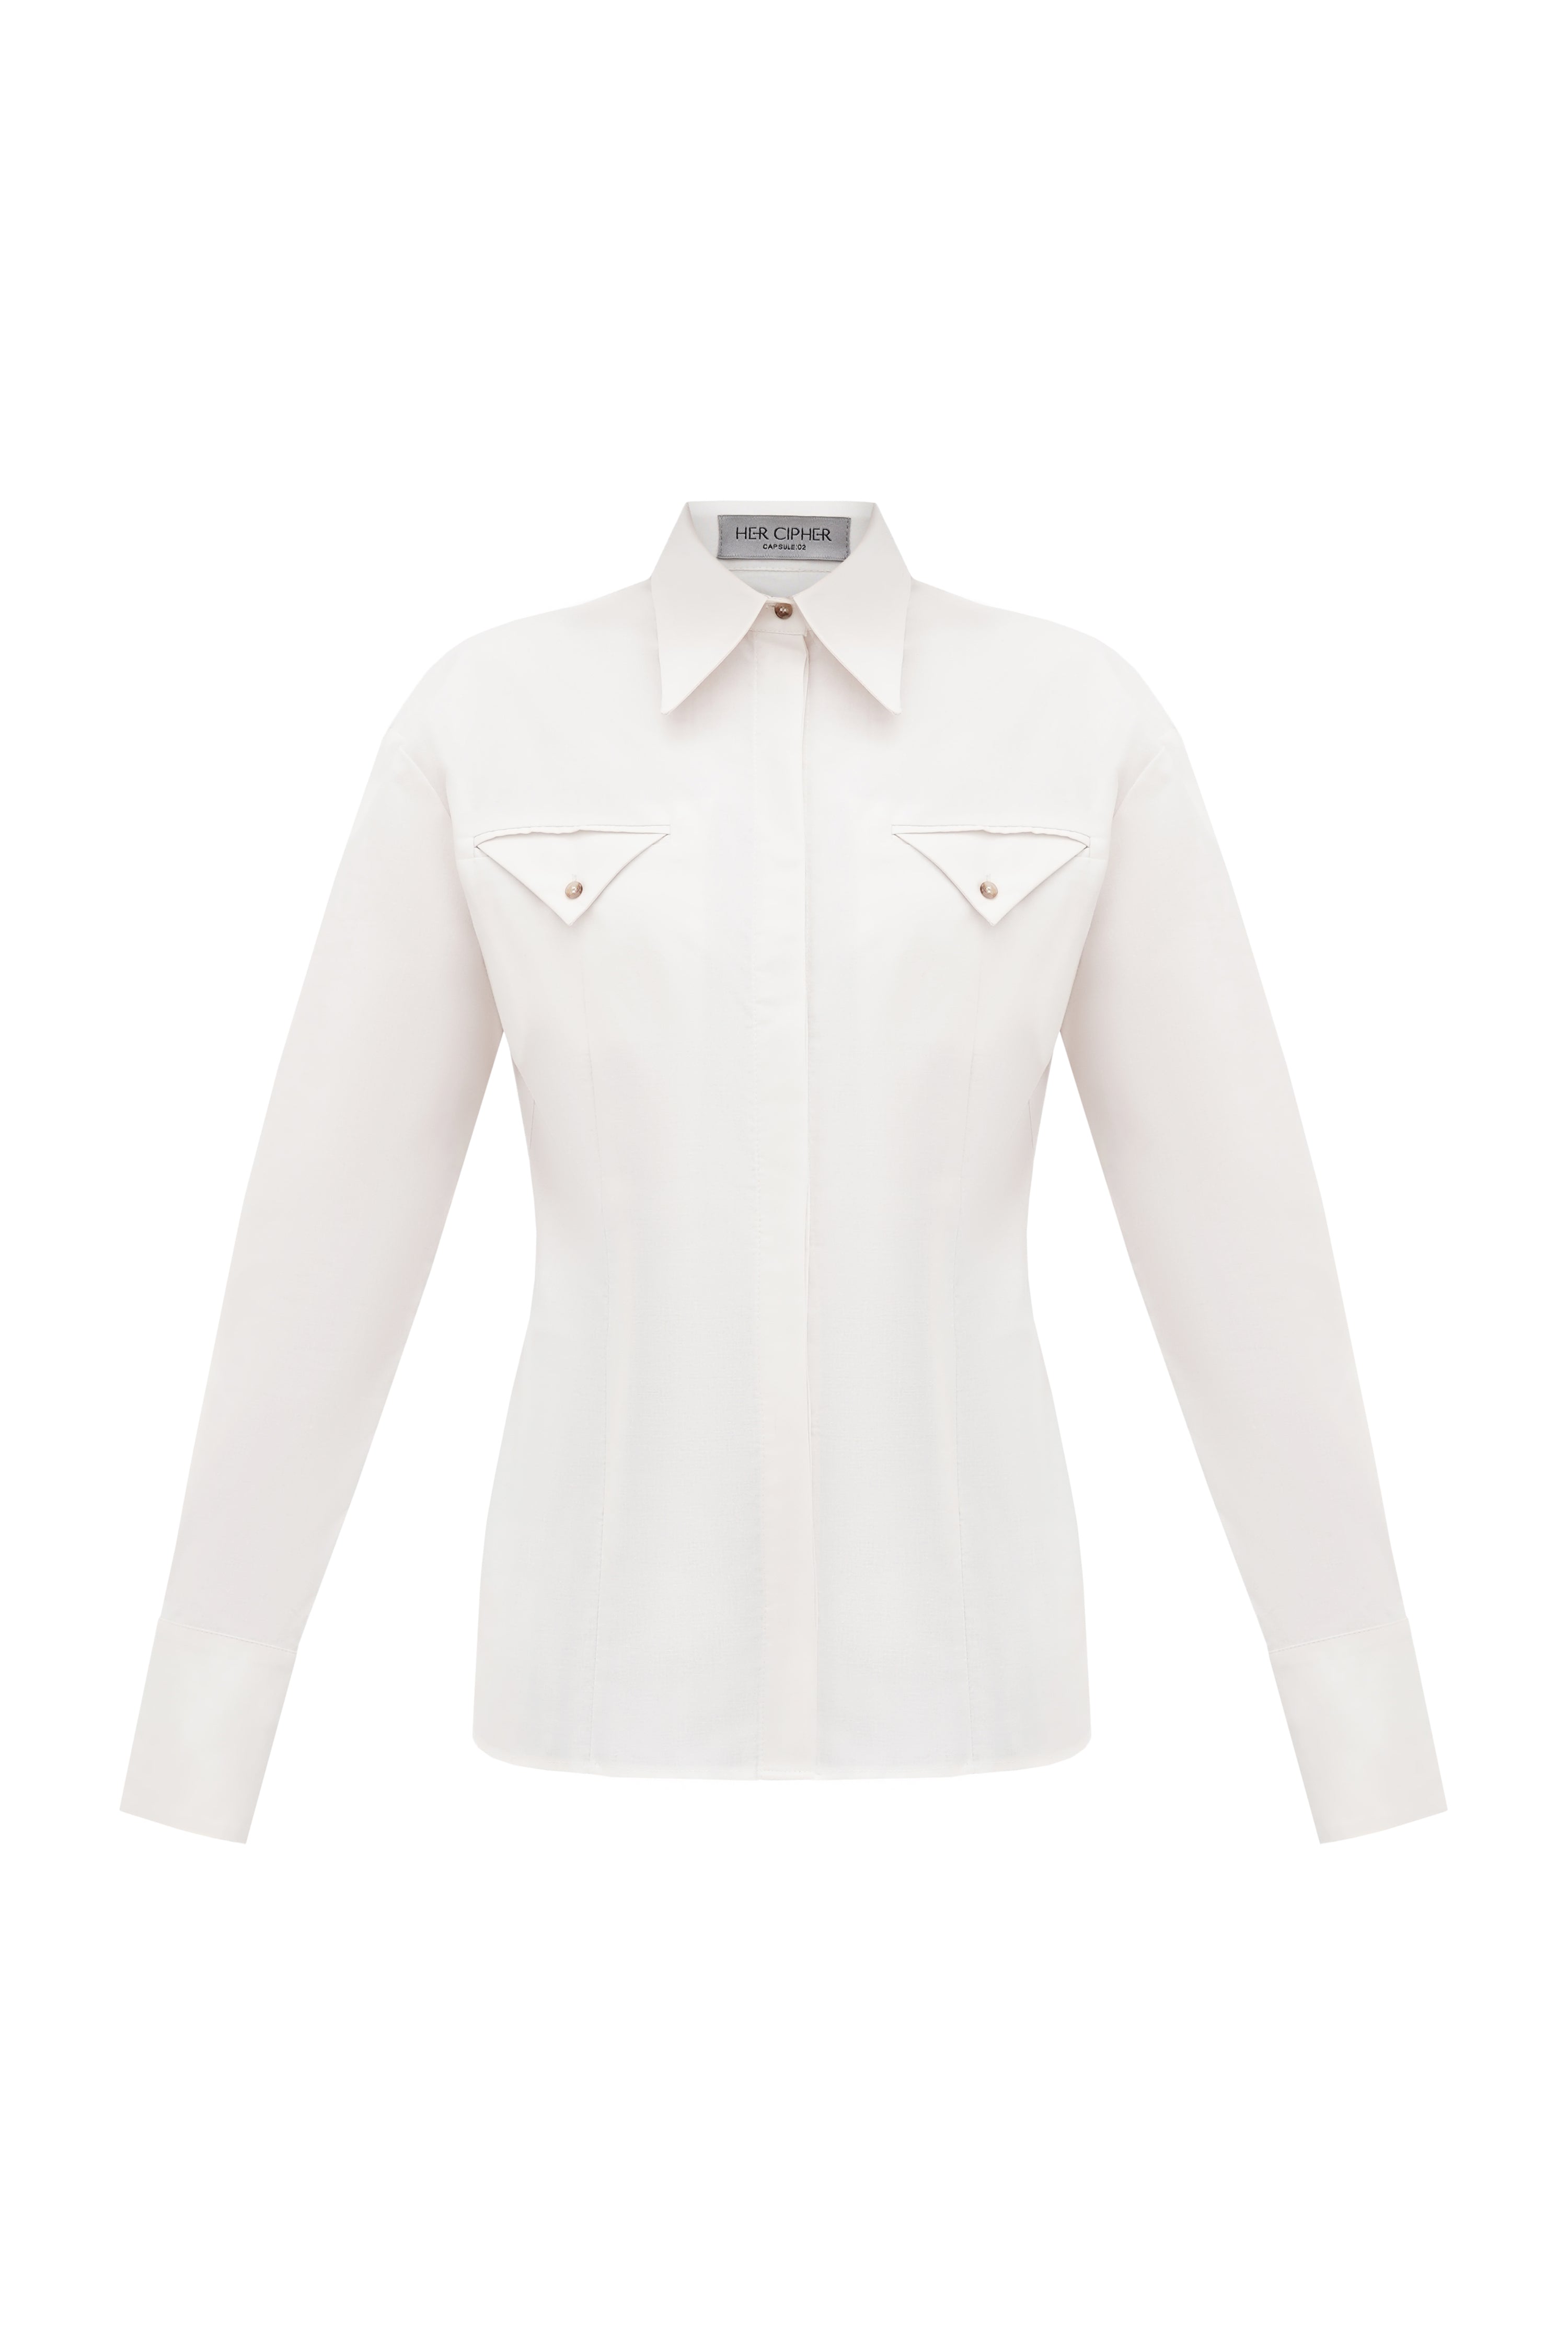 An organic 100% cotton sustainable fitted shirt with pointed collar and triangular details